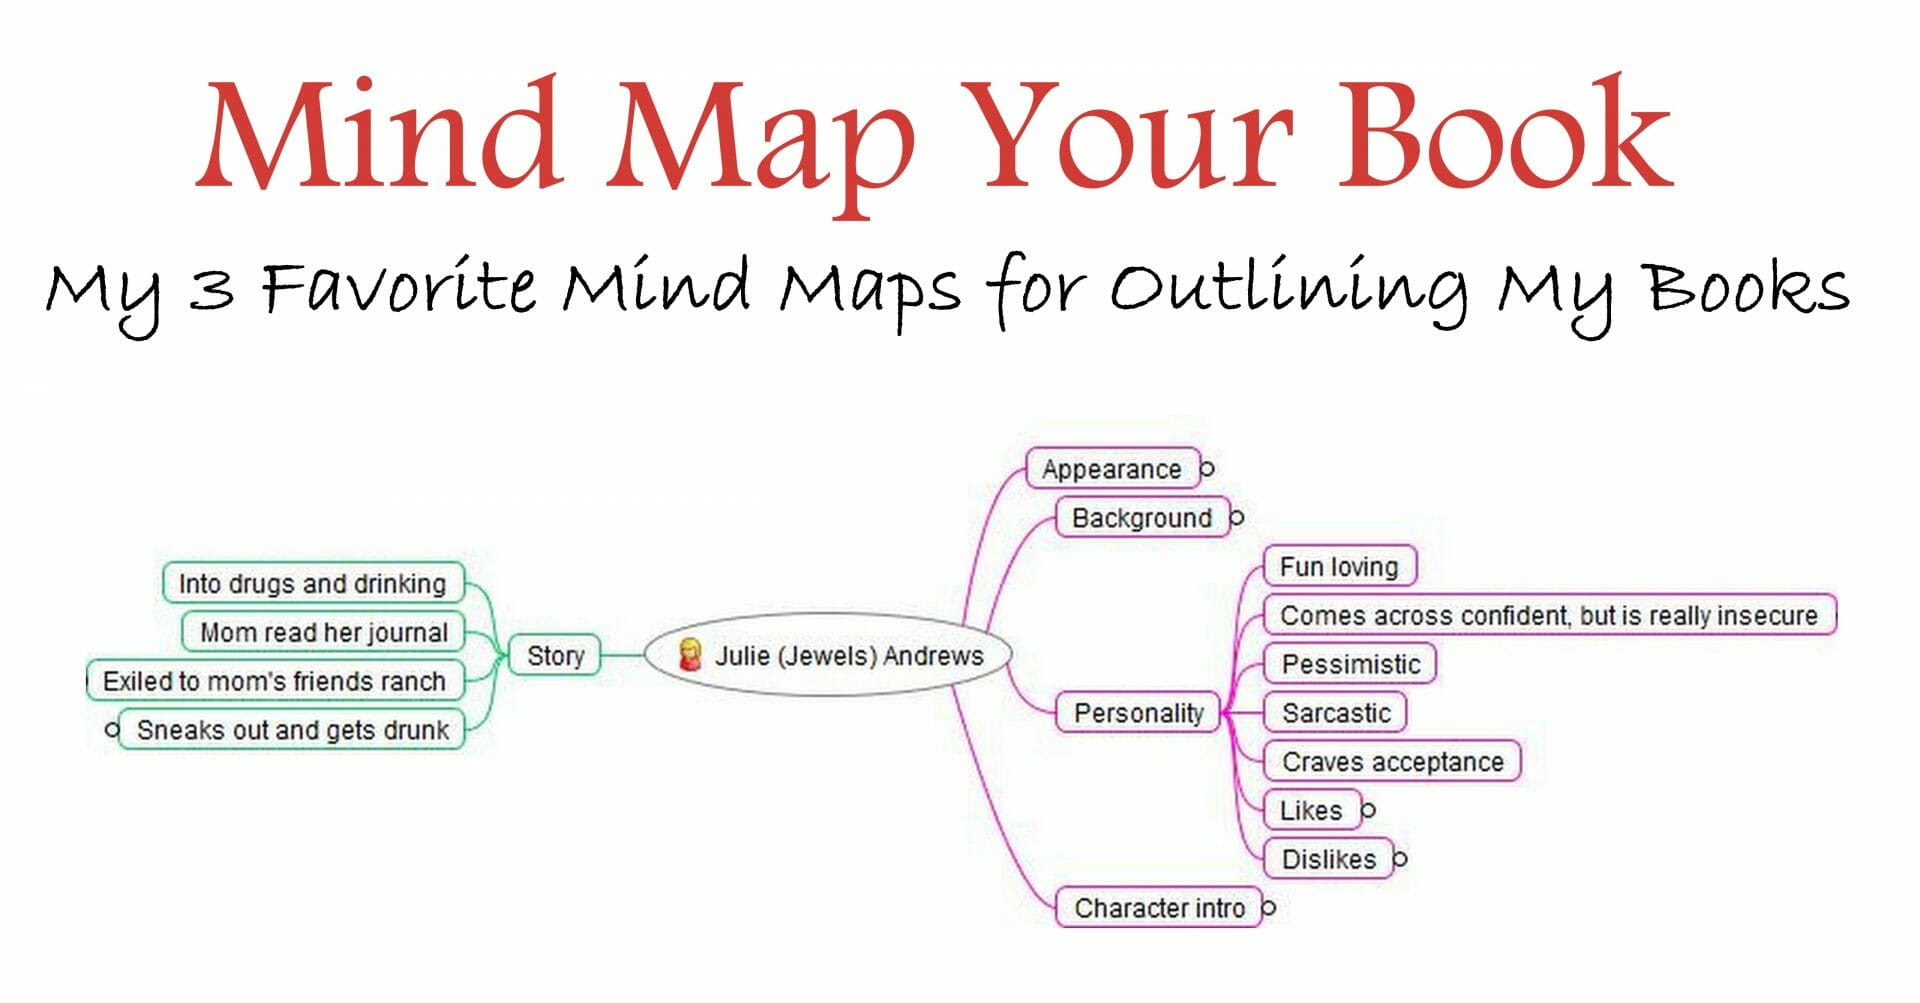 Mind Mapping Your Book - Training Authors for Success